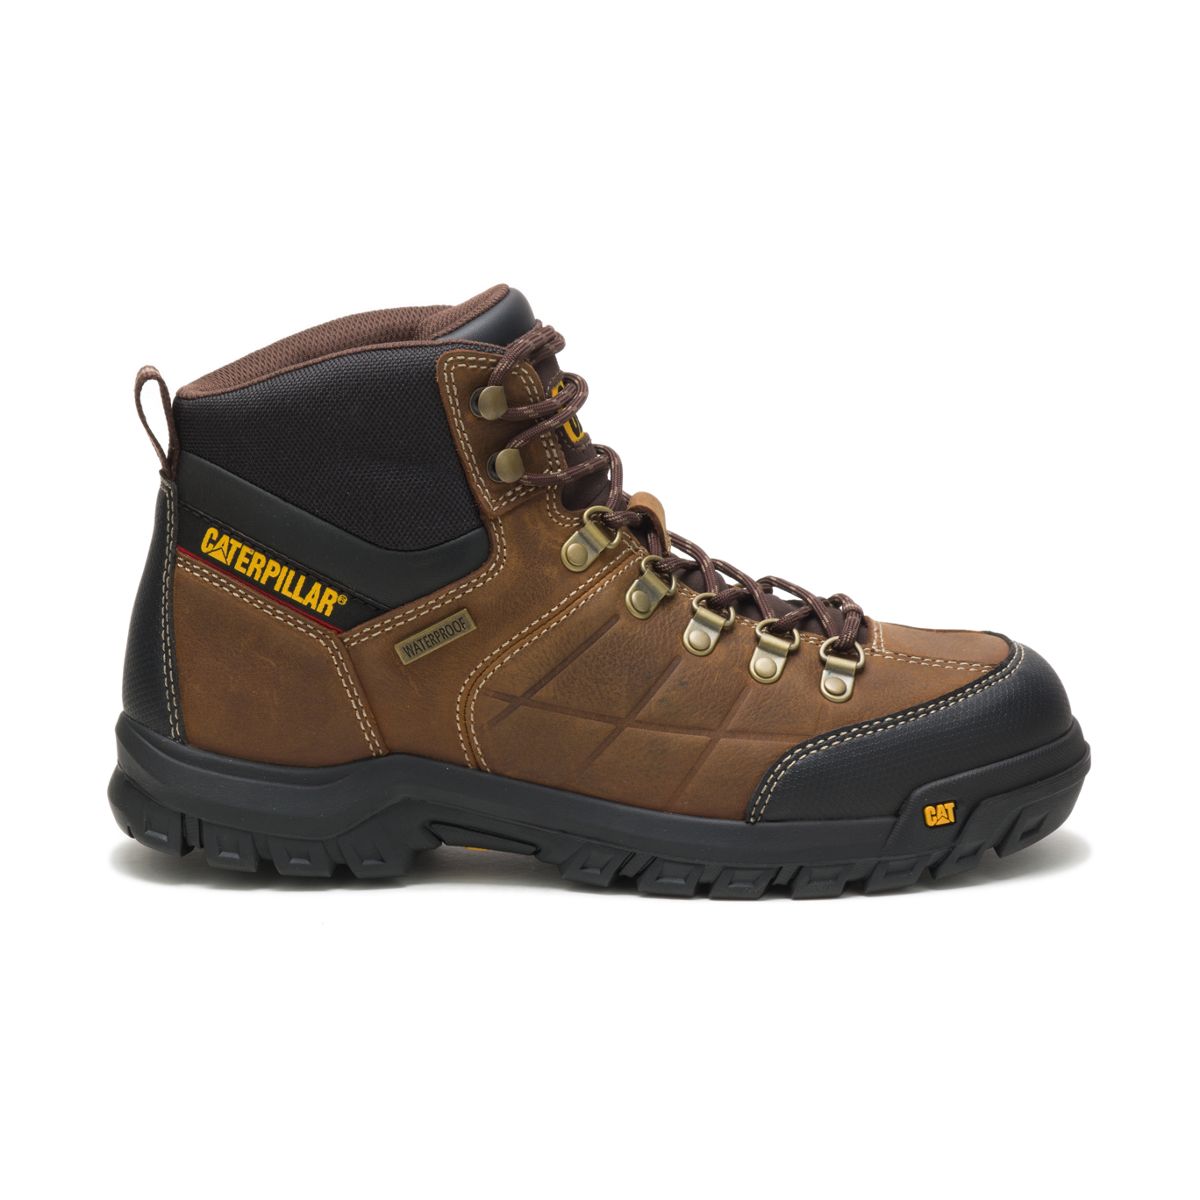 CUMIN - LOW SAFETY SHOES - BUILDING CONSTRUCTION